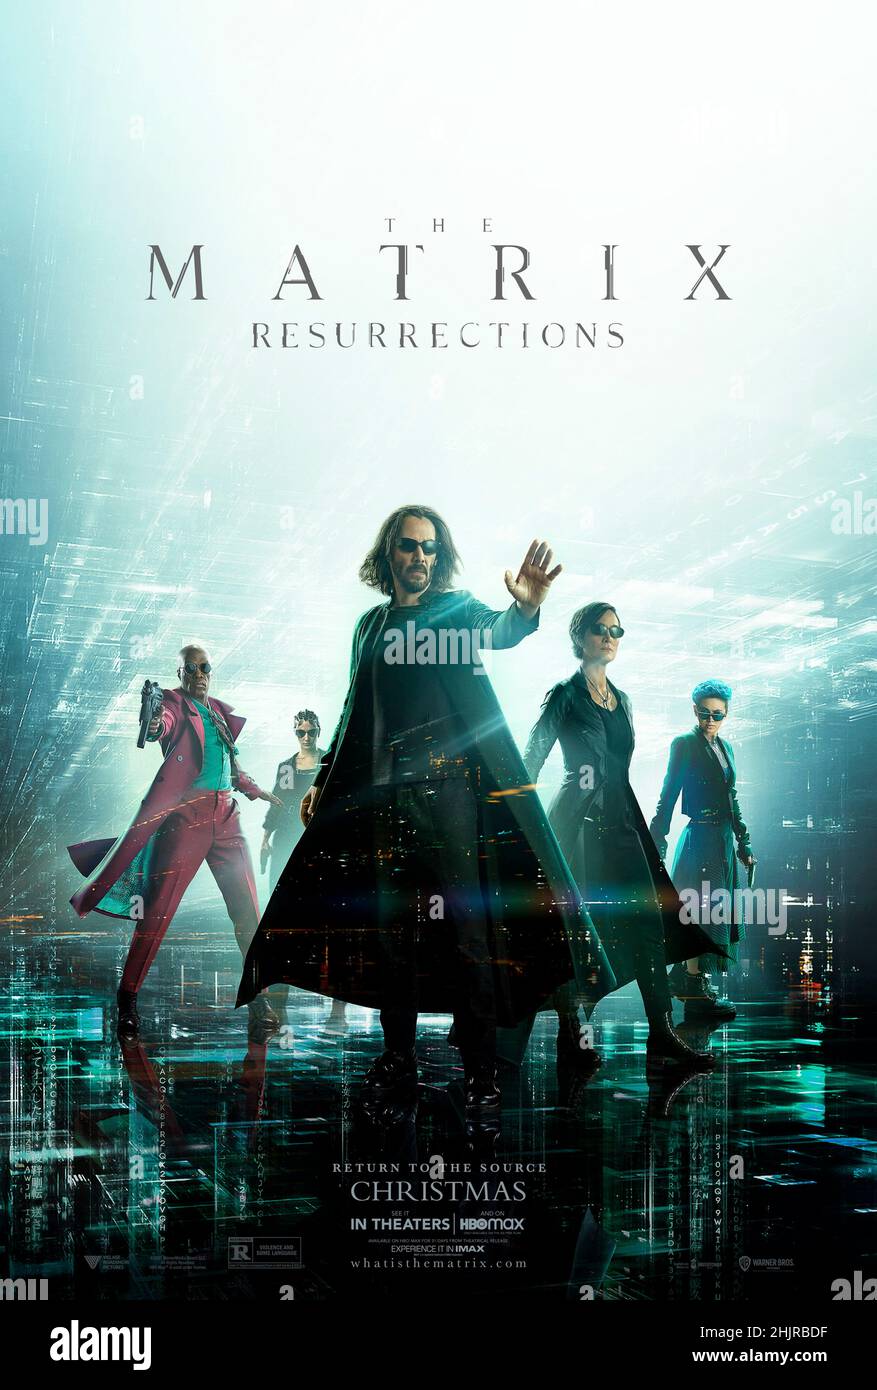 The Matrix Resurrections (2014) directed by Lana Wachowski and starring Keanu Reeves, Carrie-Anne Moss and Yahya Abdul-Mateen II. Return to a world of two realities: one, everyday life; the other, what lies behind it. To find out if his reality is a construct, to truly know himself, Mr. Anderson will have to choose to follow the white rabbit once more. Stock Photo